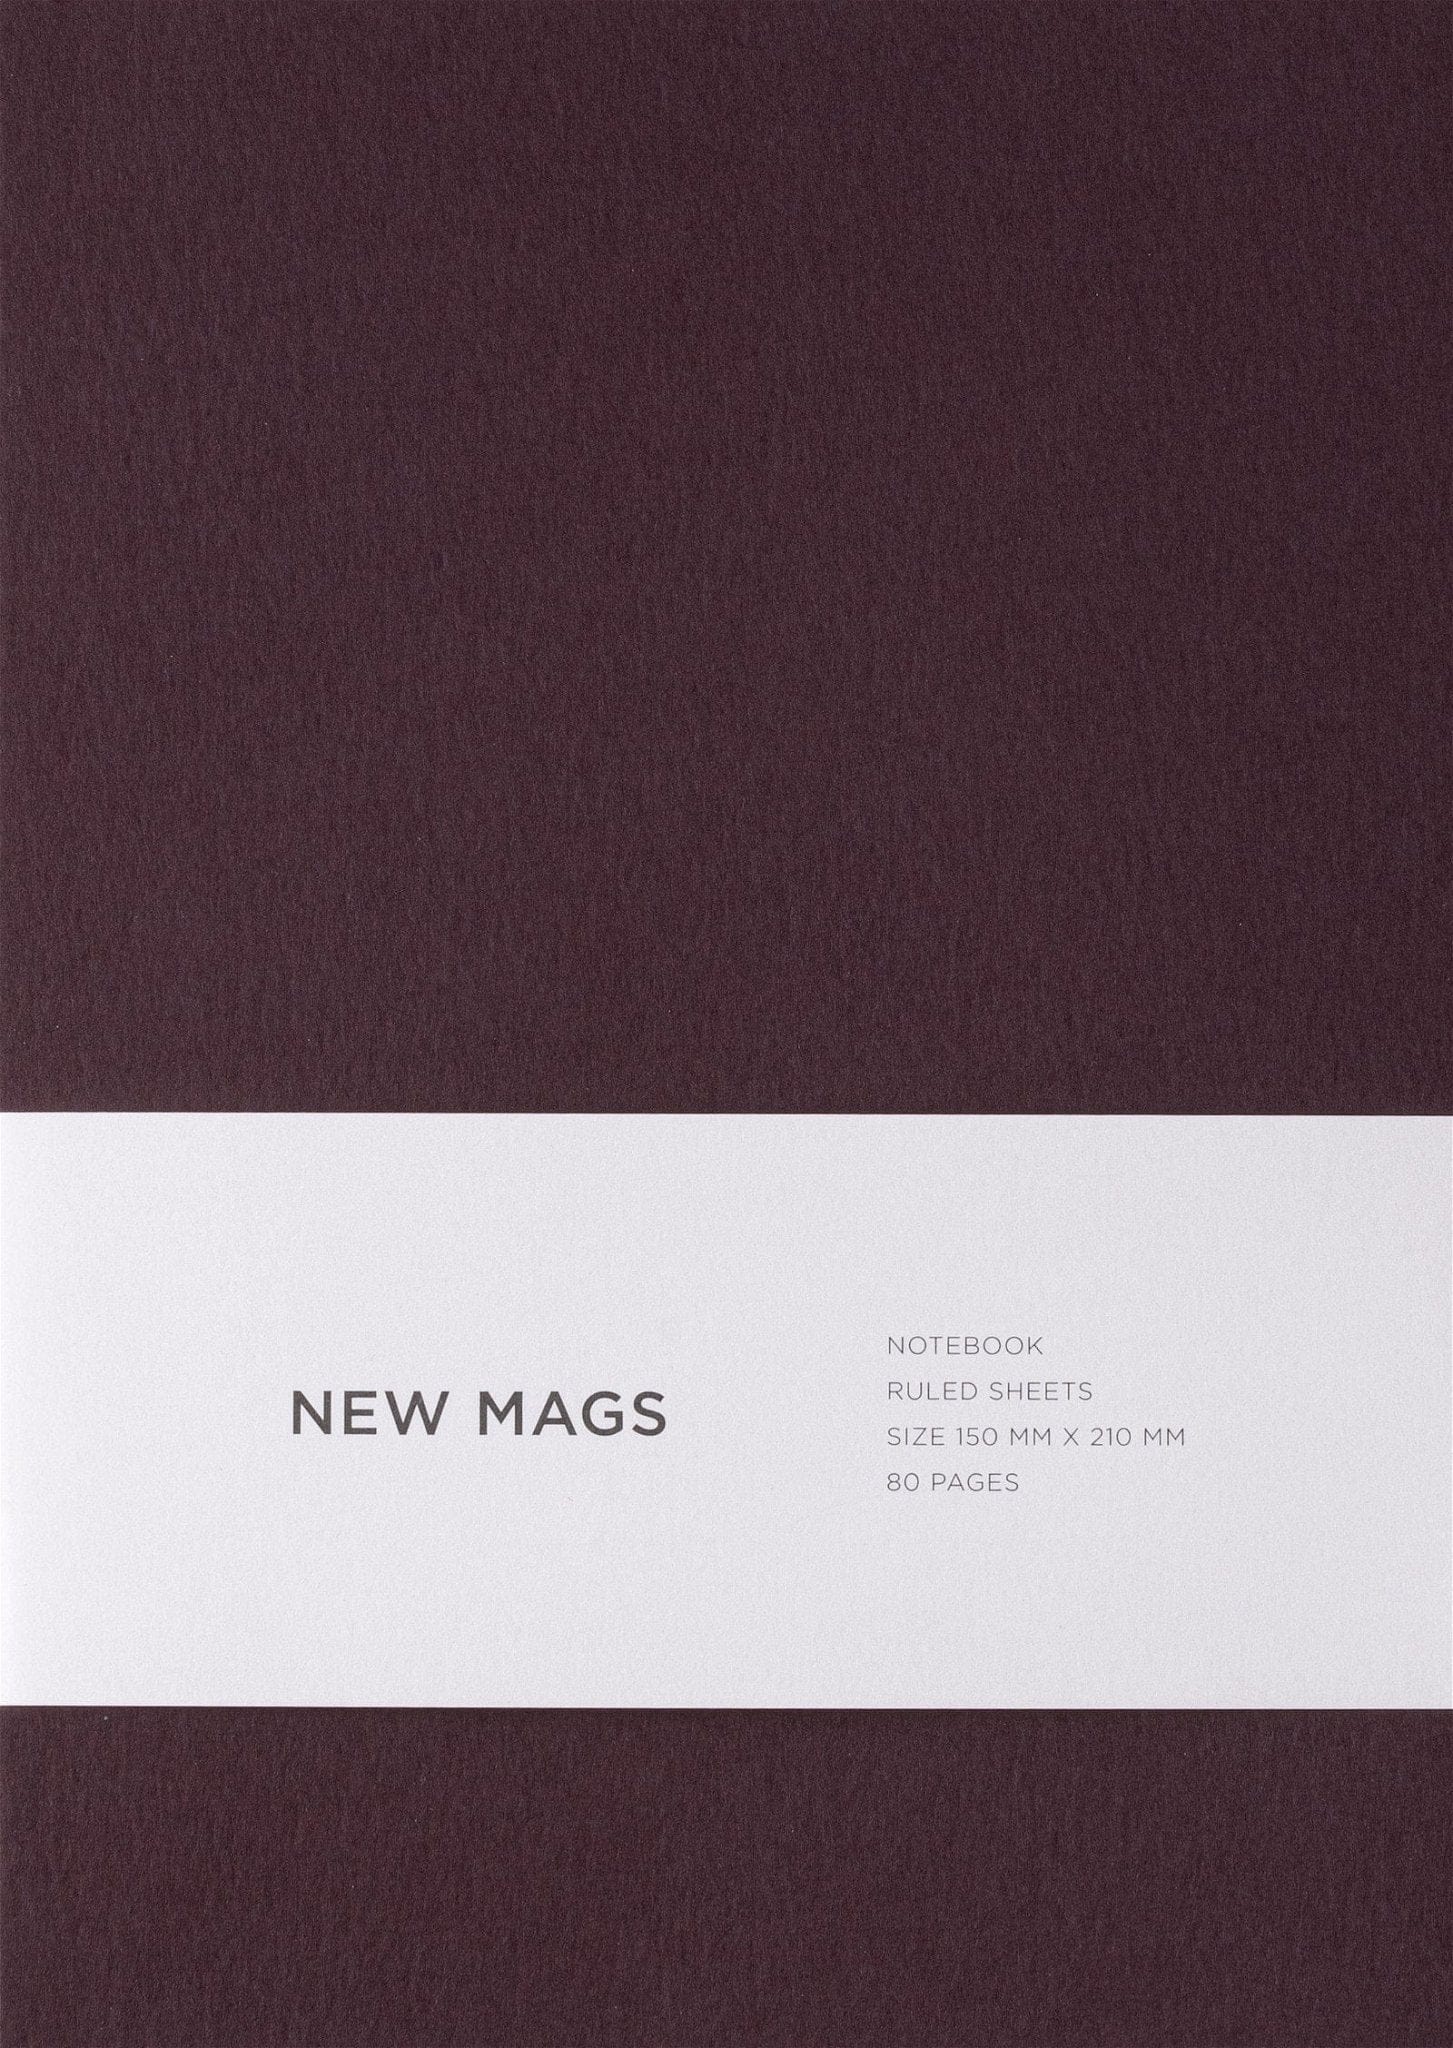 NewMags Agenda Notebook Port Wine - Softcover/Ruled, in Limba Engleza